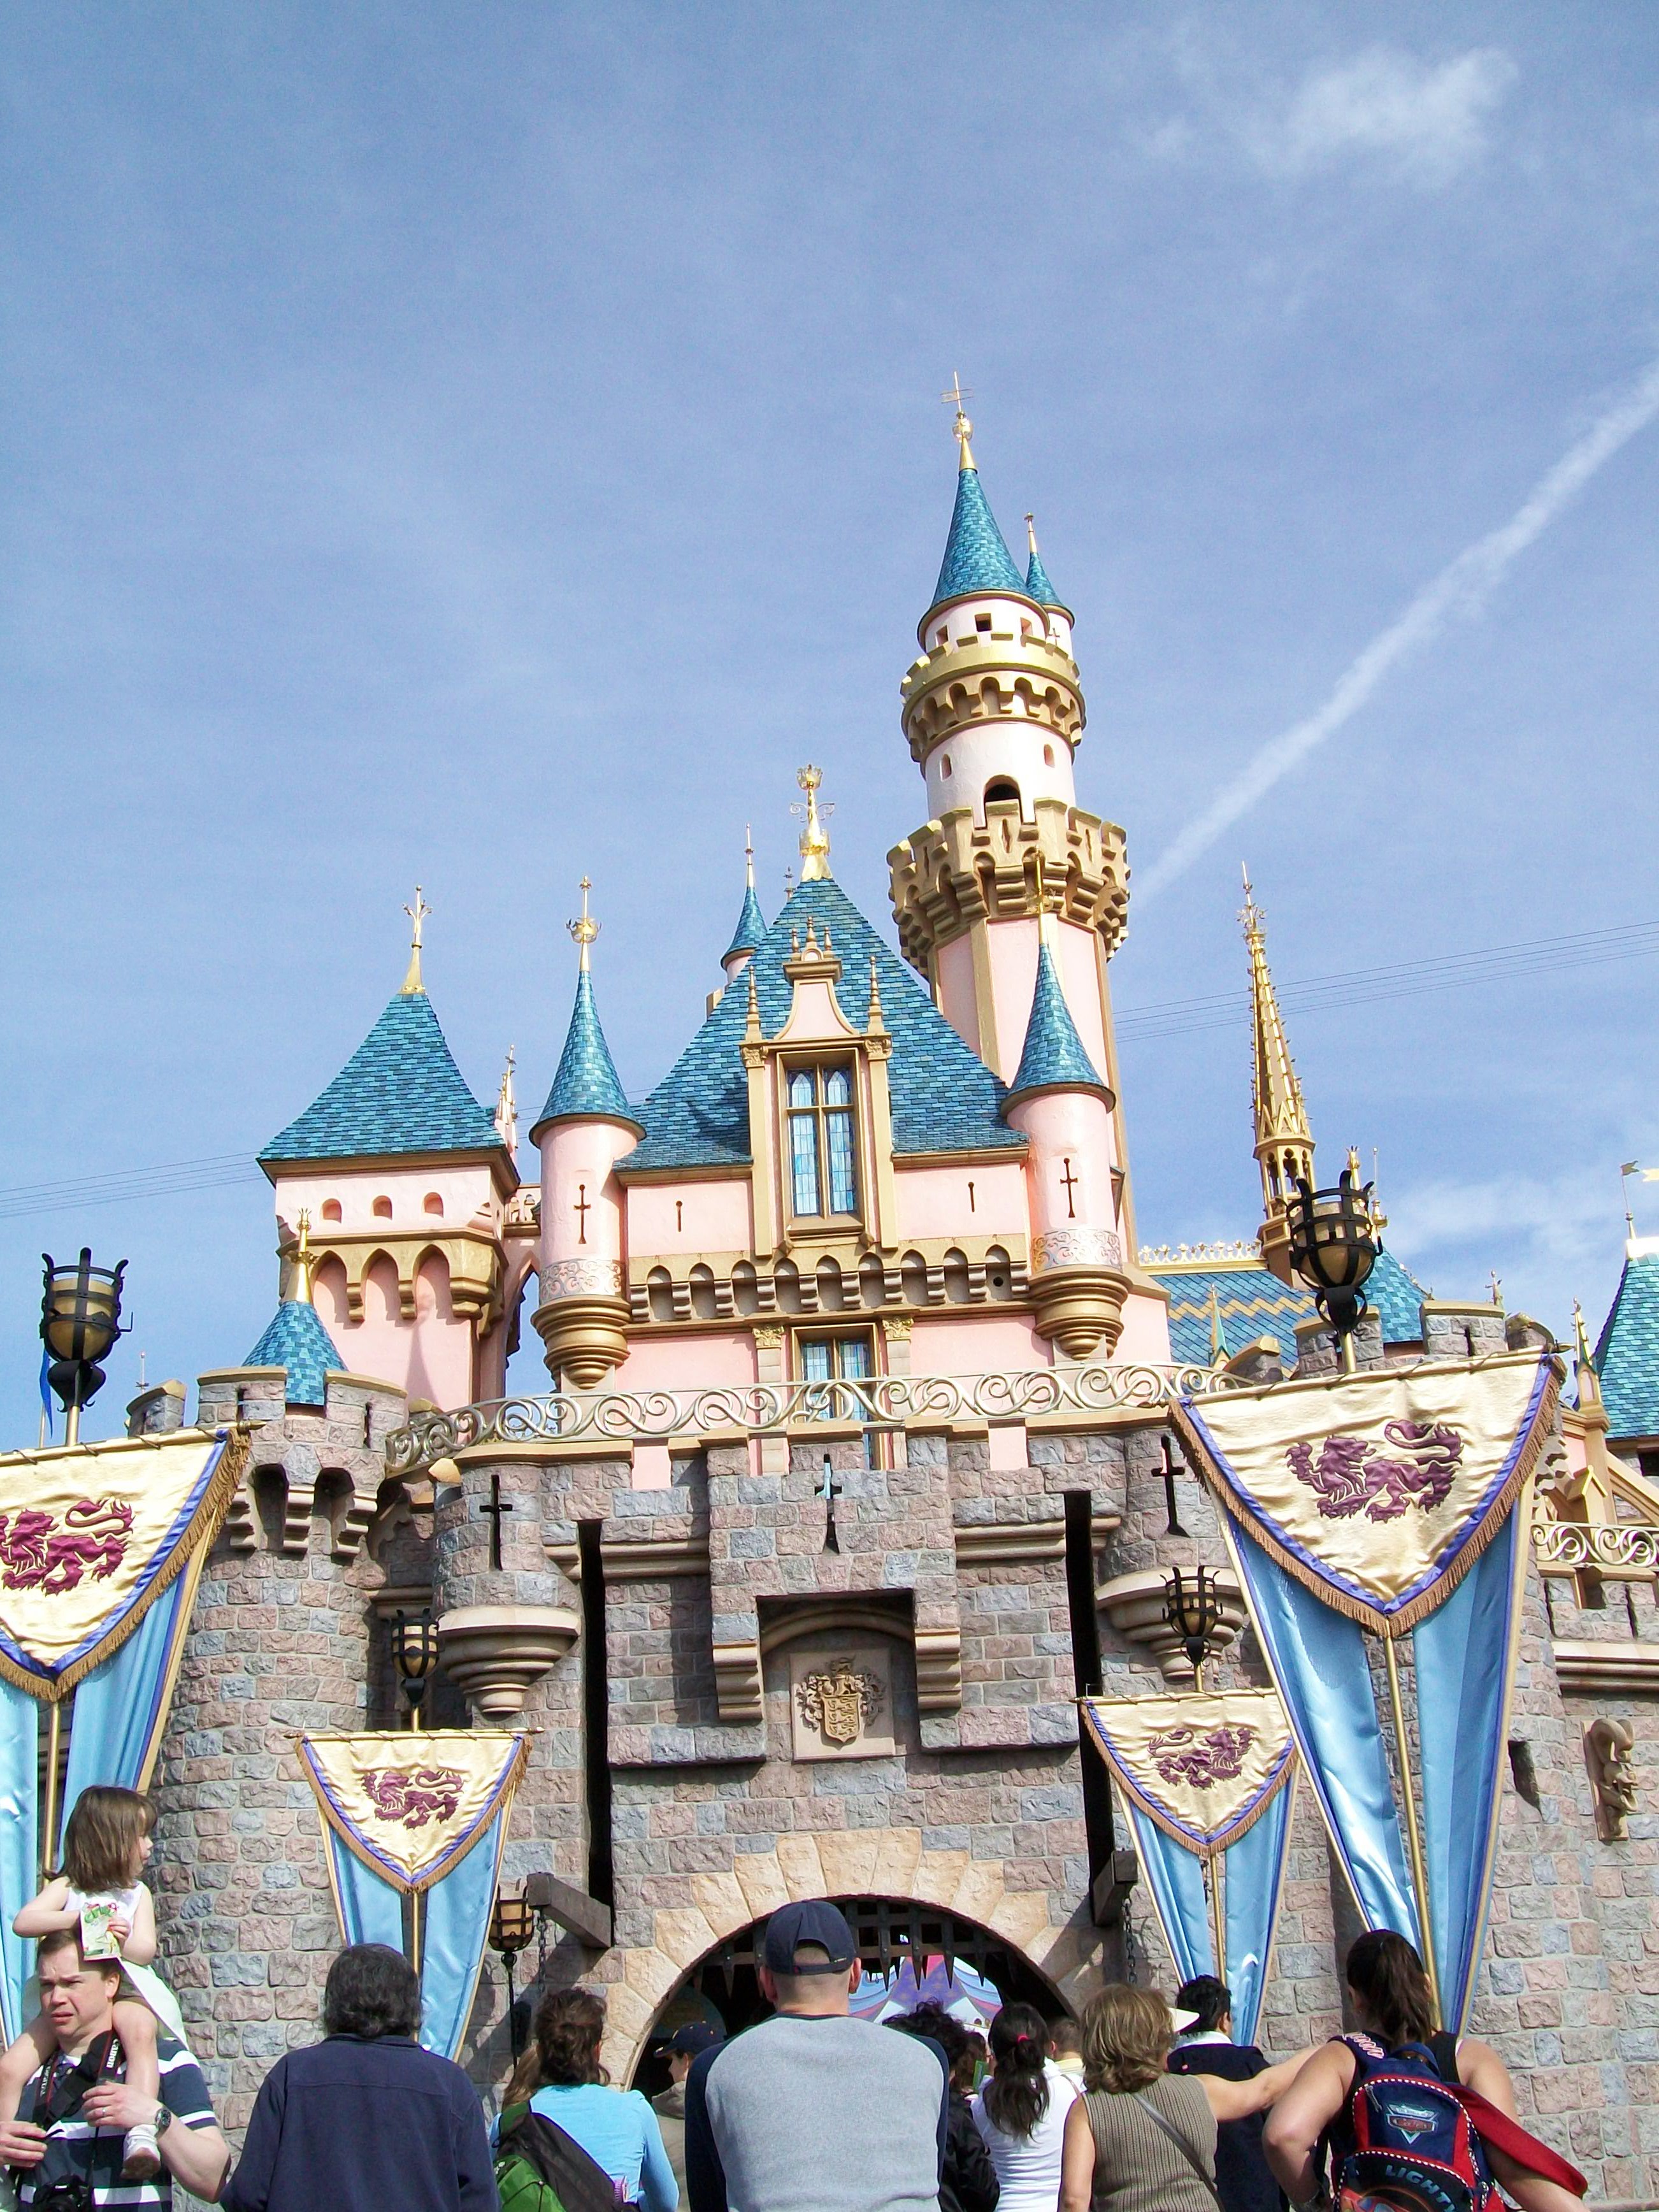 The Top 5 Things That Make Disneyland Unique